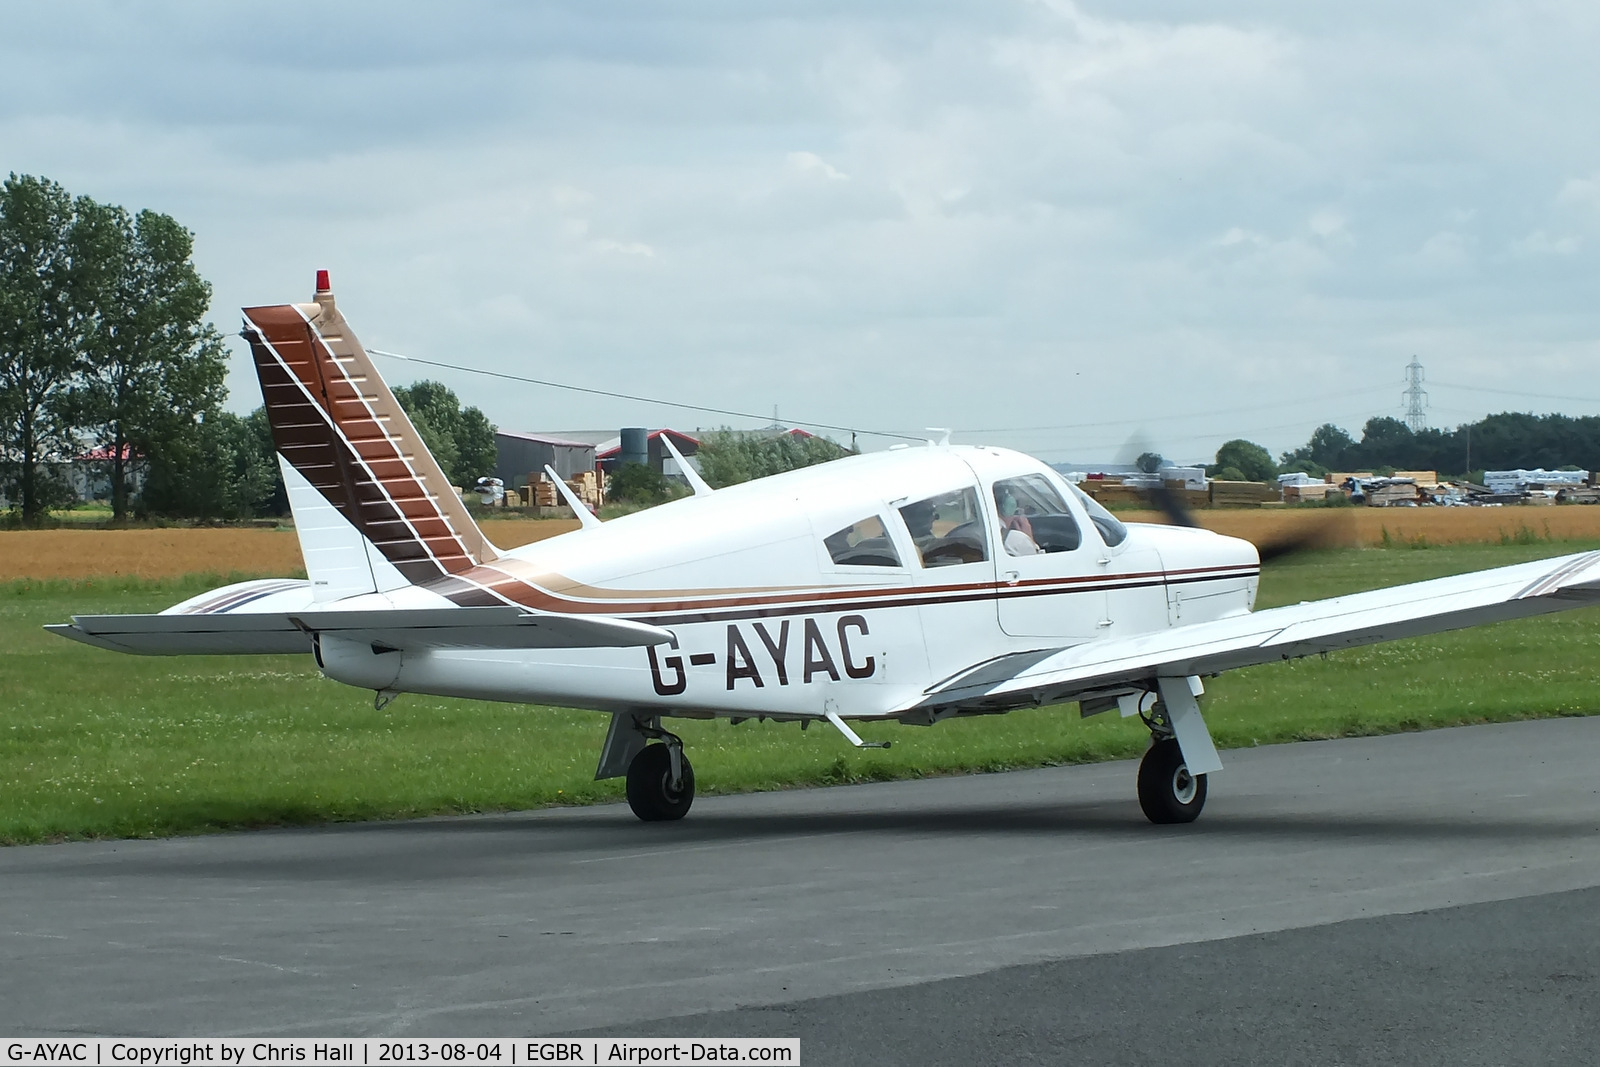 G-AYAC, 1969 Piper PA-28R-200 Cherokee Arrow C/N 28R-35606, at Breighton's Summer Fly-in